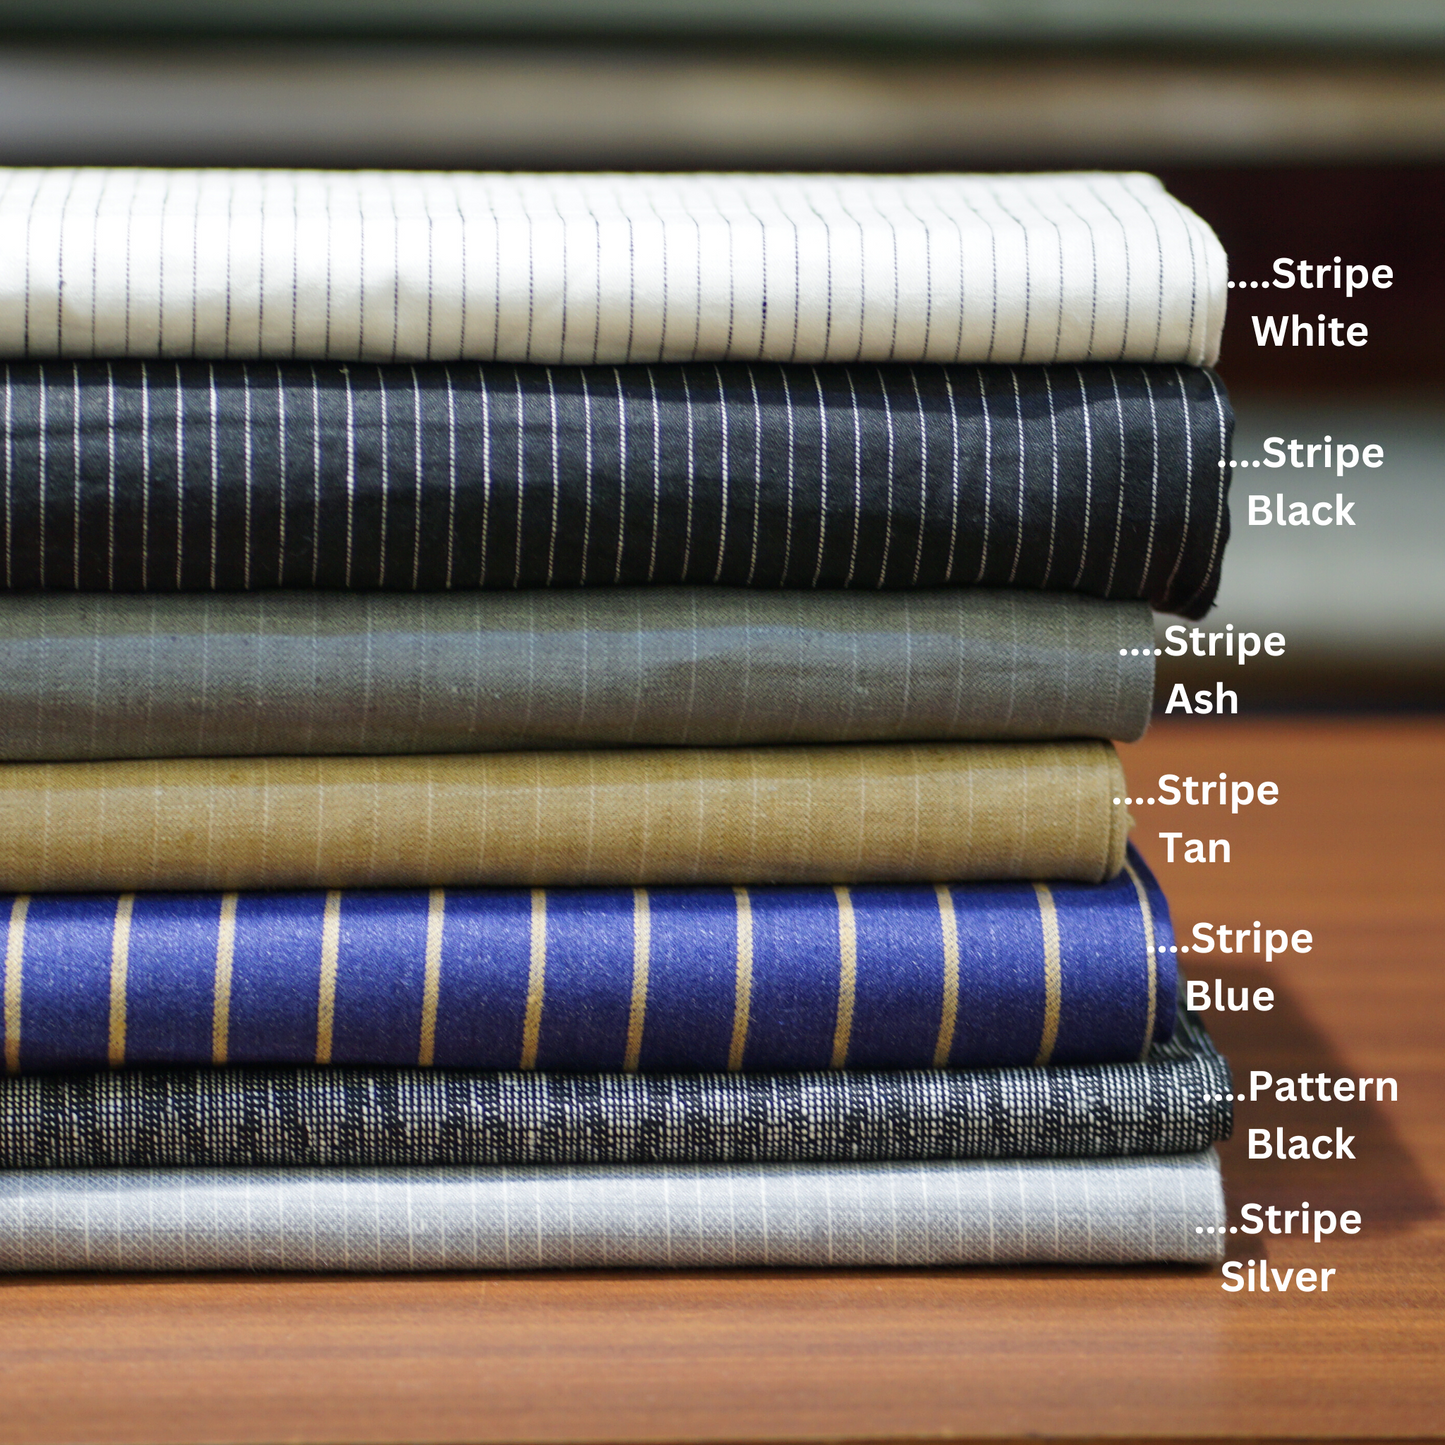 Stripe Linen, Pure Linen Fabric, Used for Cord Sets, Suits, Trousers, Tableware, Upholstery